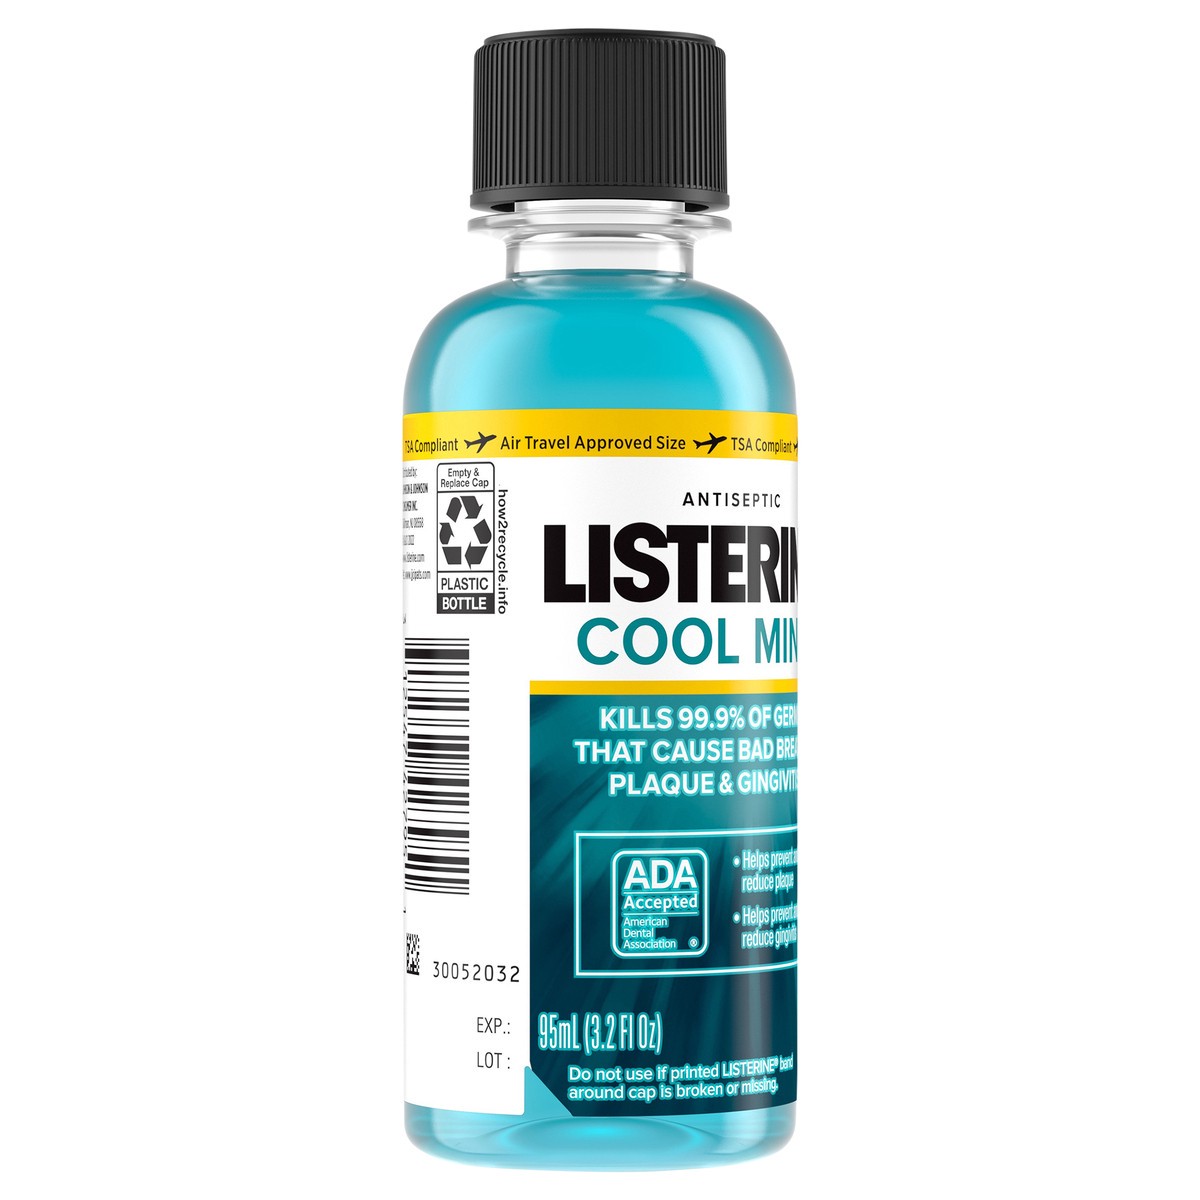 slide 4 of 7, Listerine Cool Mint Antiseptic Mouthwash, Daily Oral Rinse Kills 99% of Germs that Cause Bad Breath, Plaque and Gingivitis for a Fresher, Cleaner Mouth, Cool Mint, Travel Size, 3.2 oz, 3.20 fl oz